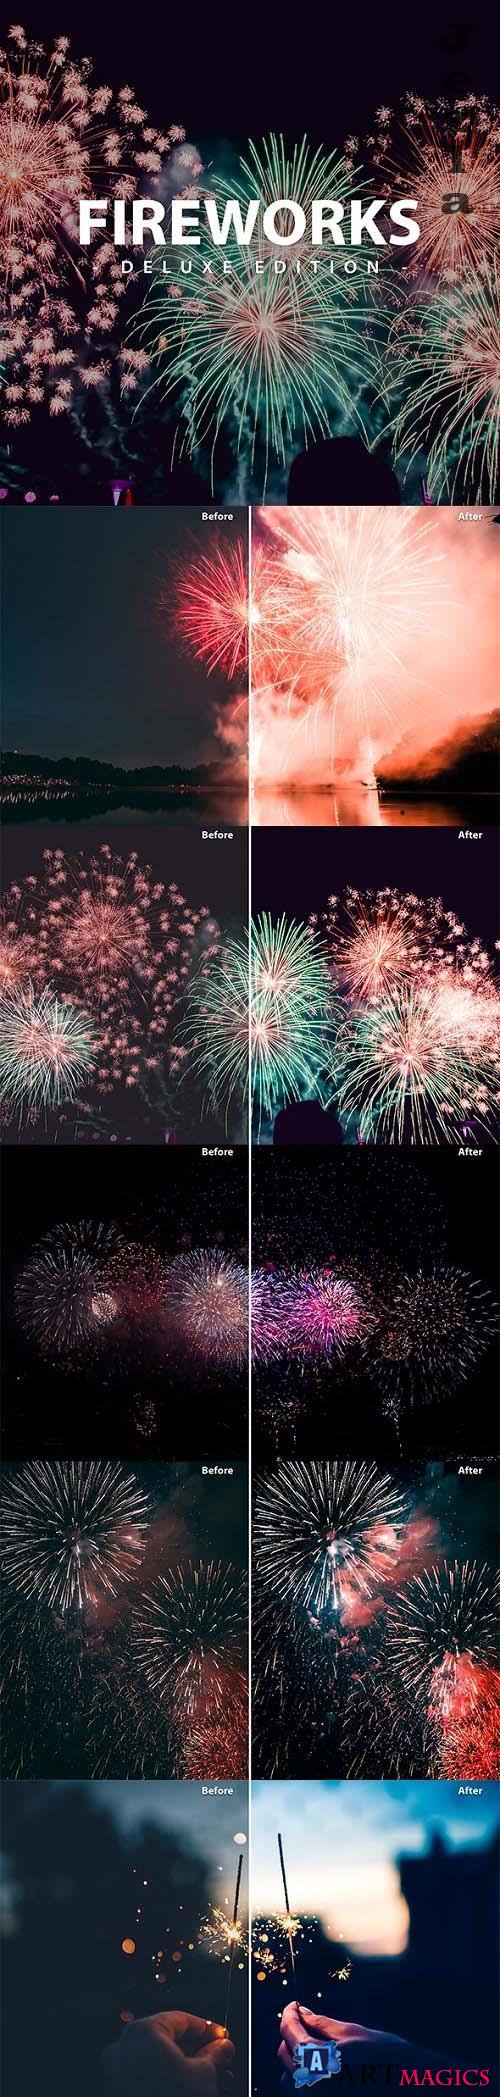 Fireworks Deluxe Edition | for Mobile and Desktop - 33180875